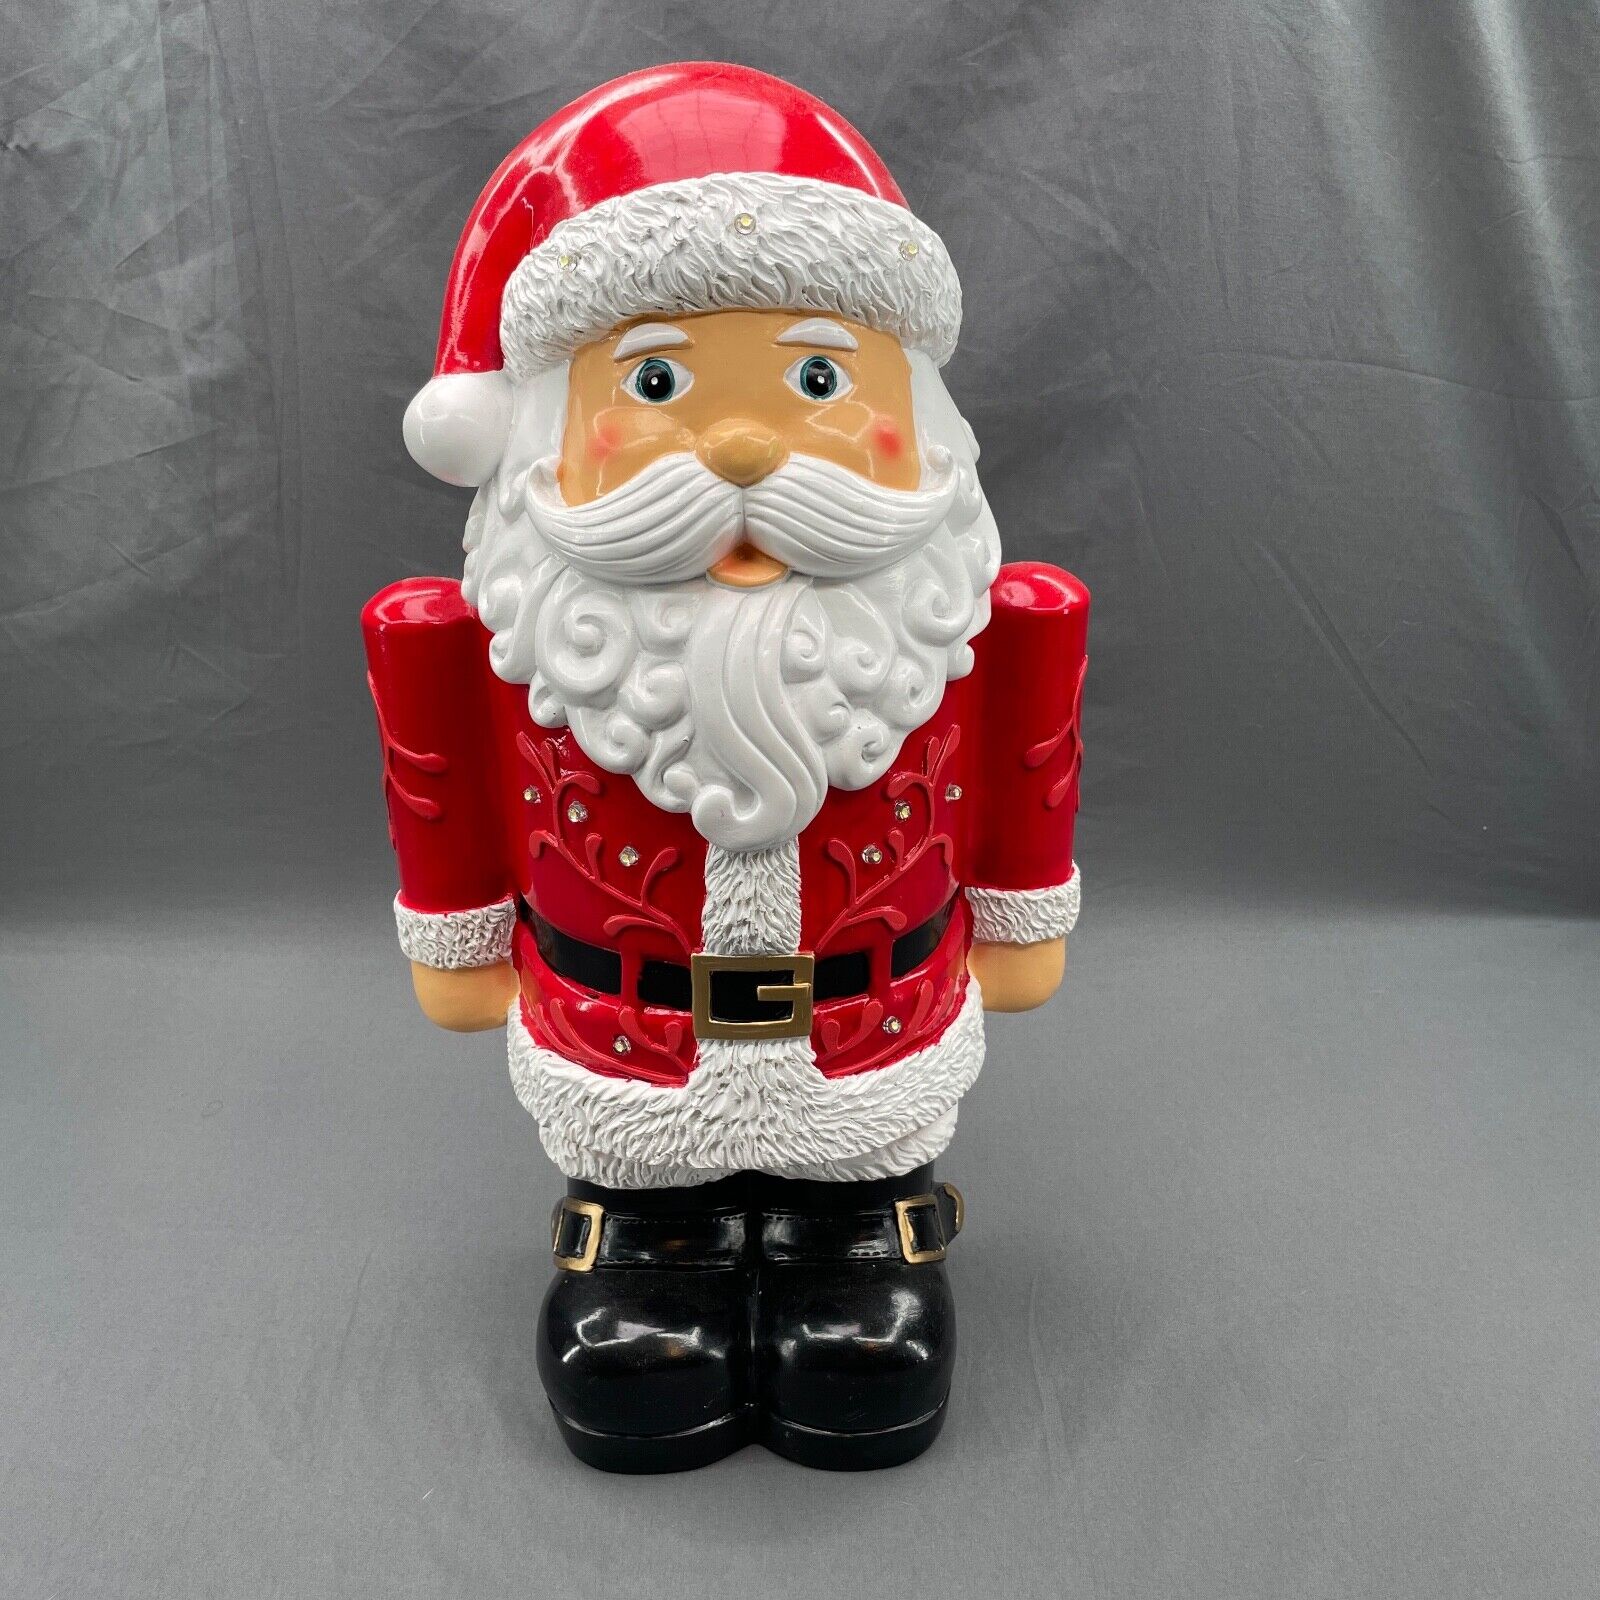 18.5” LED Resin Light Up Santa Claus Statue 2 Light Modes Made in Cambodia